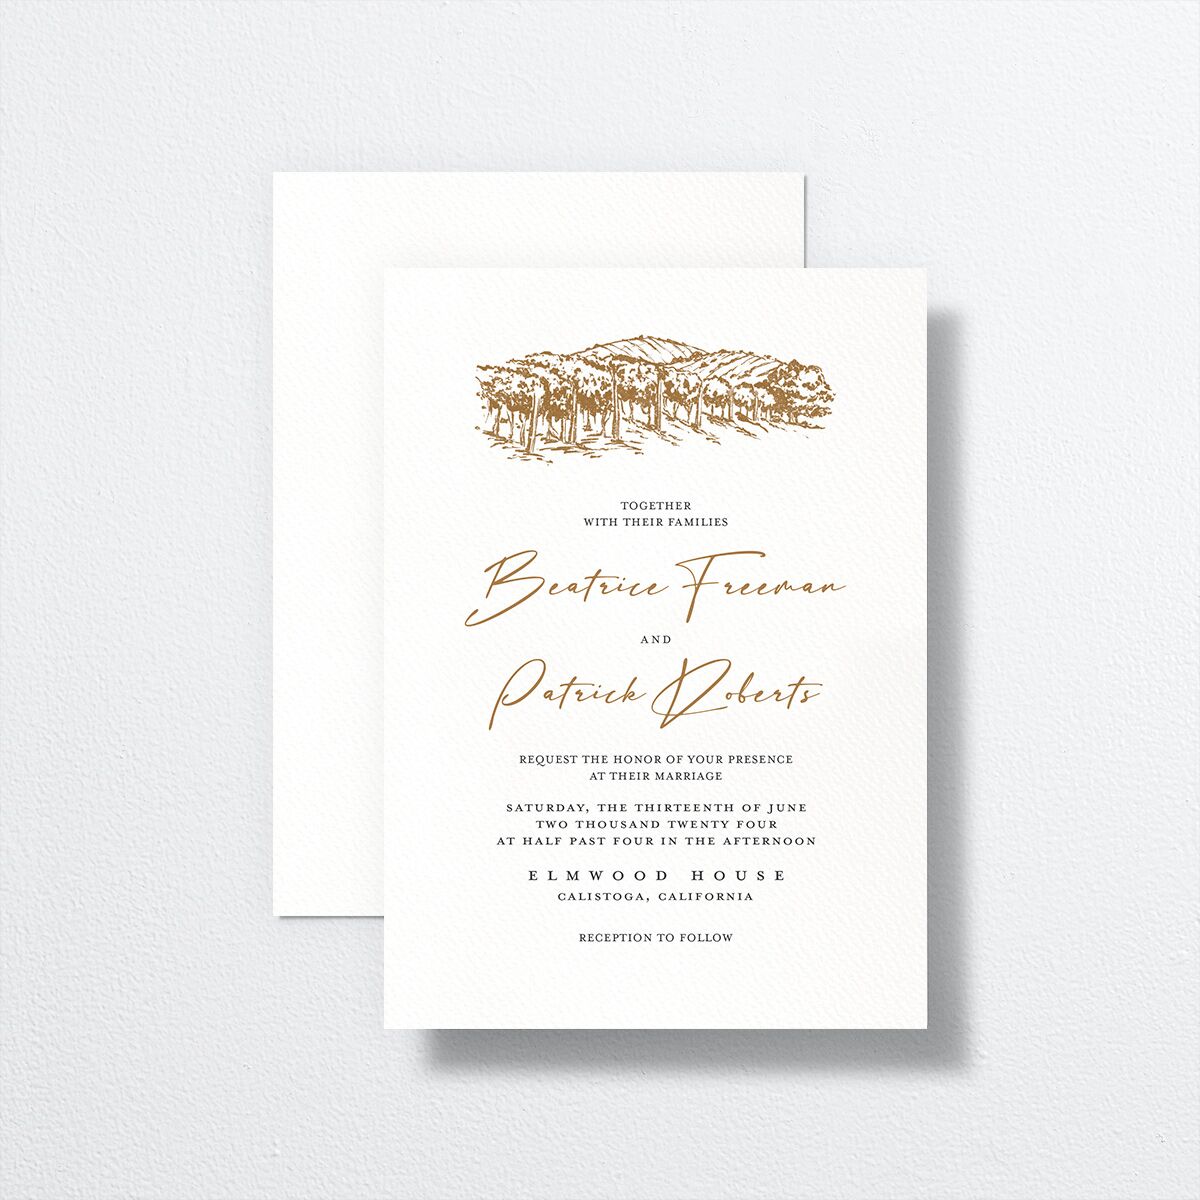 Romantic Setting Wedding Invitations front-and-back in gold